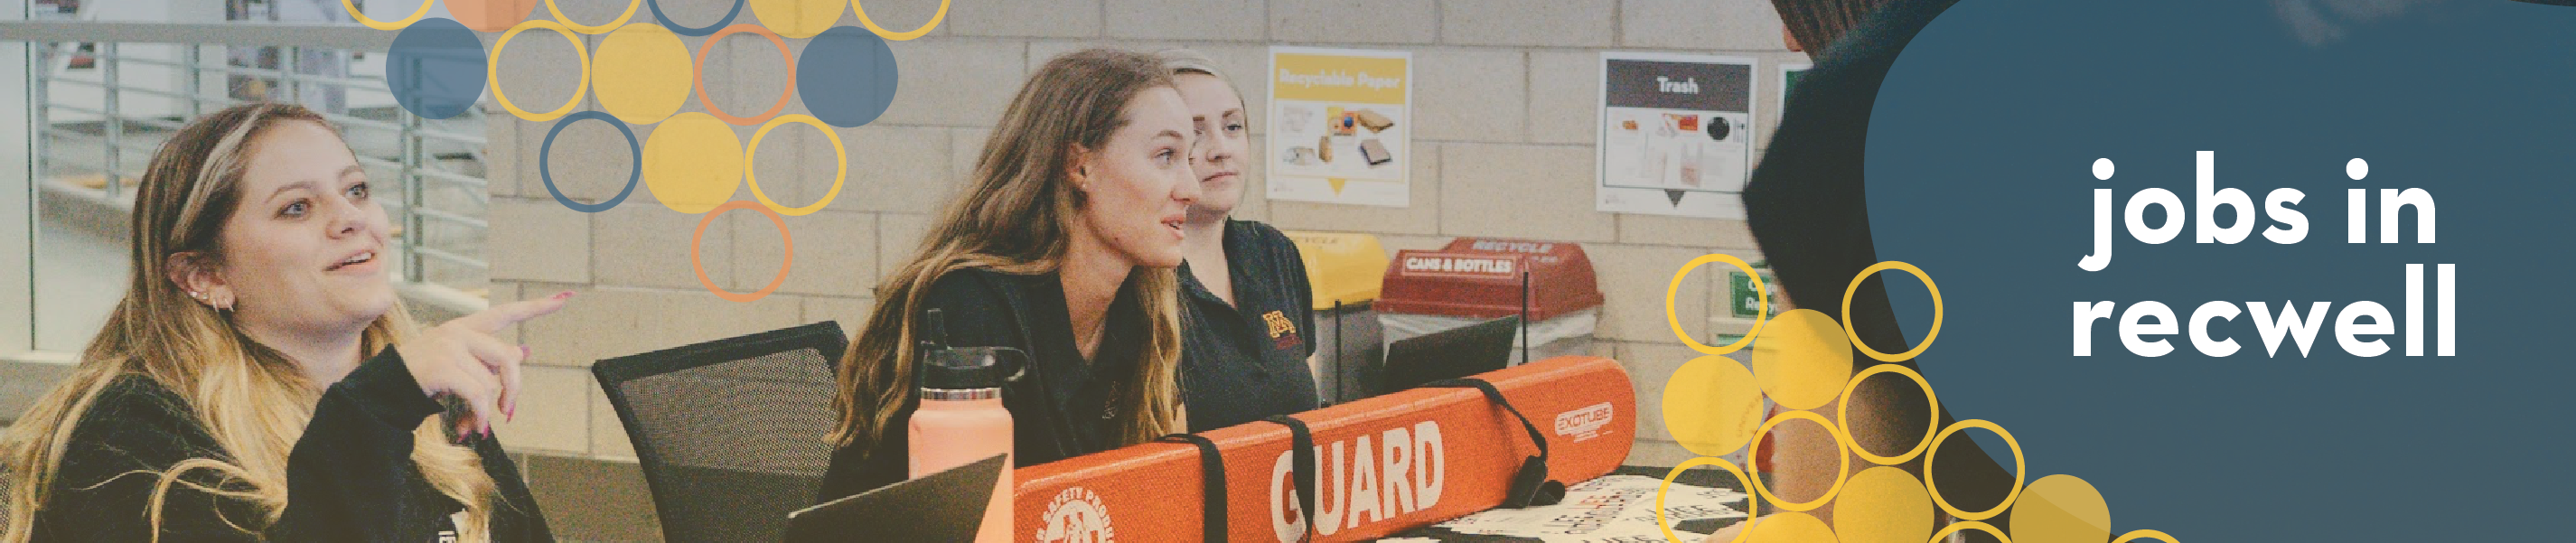 three students sitting at a table with a lifeguard rescue buoy with the text "jobs in recwell"